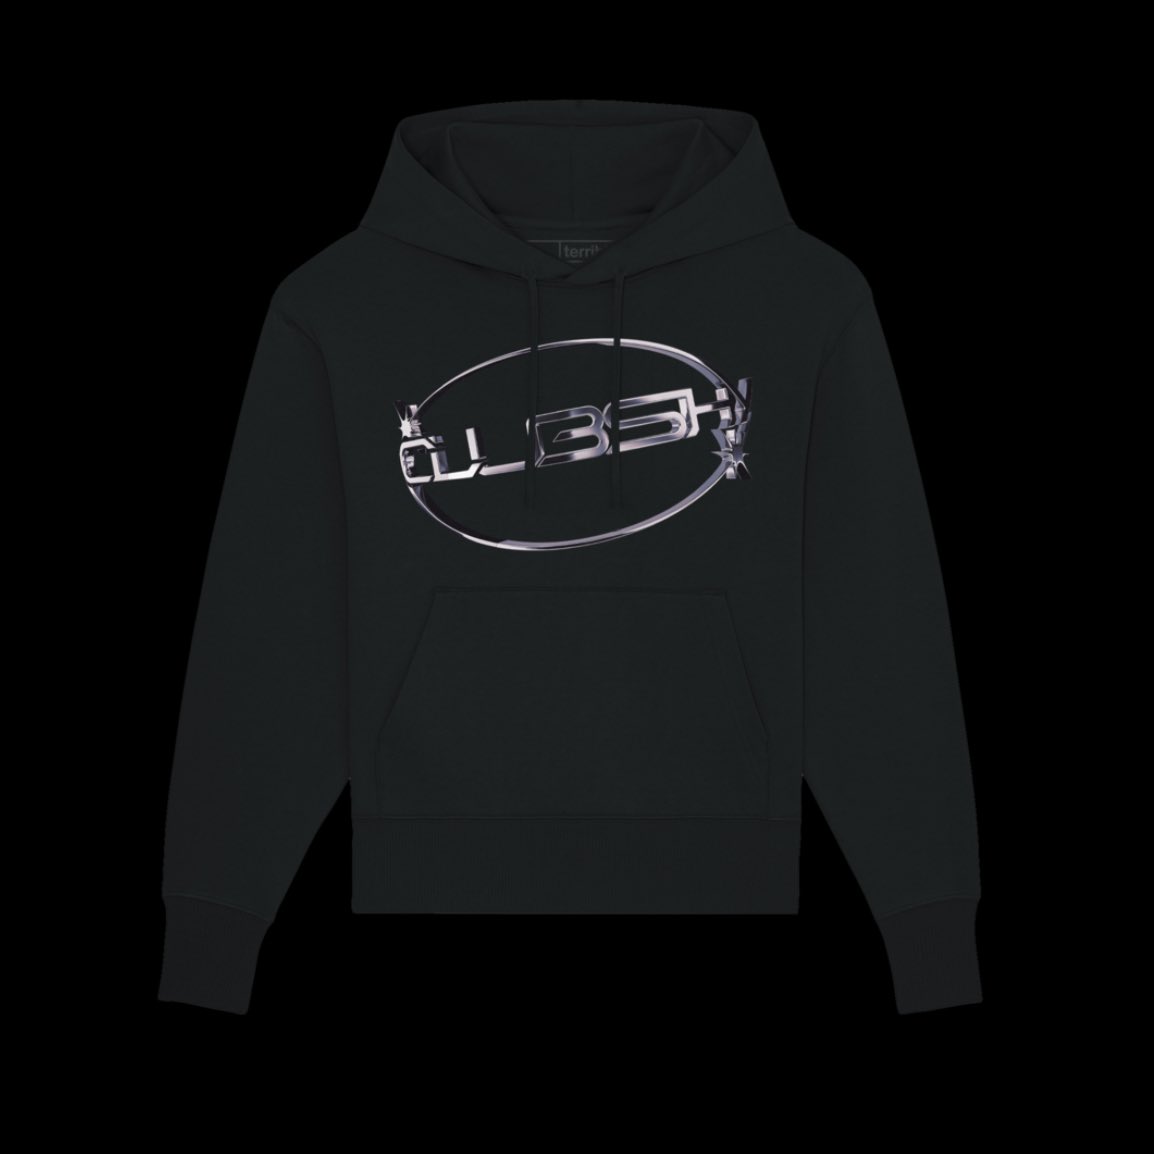 New Club Shy hoodie available for Pre order!